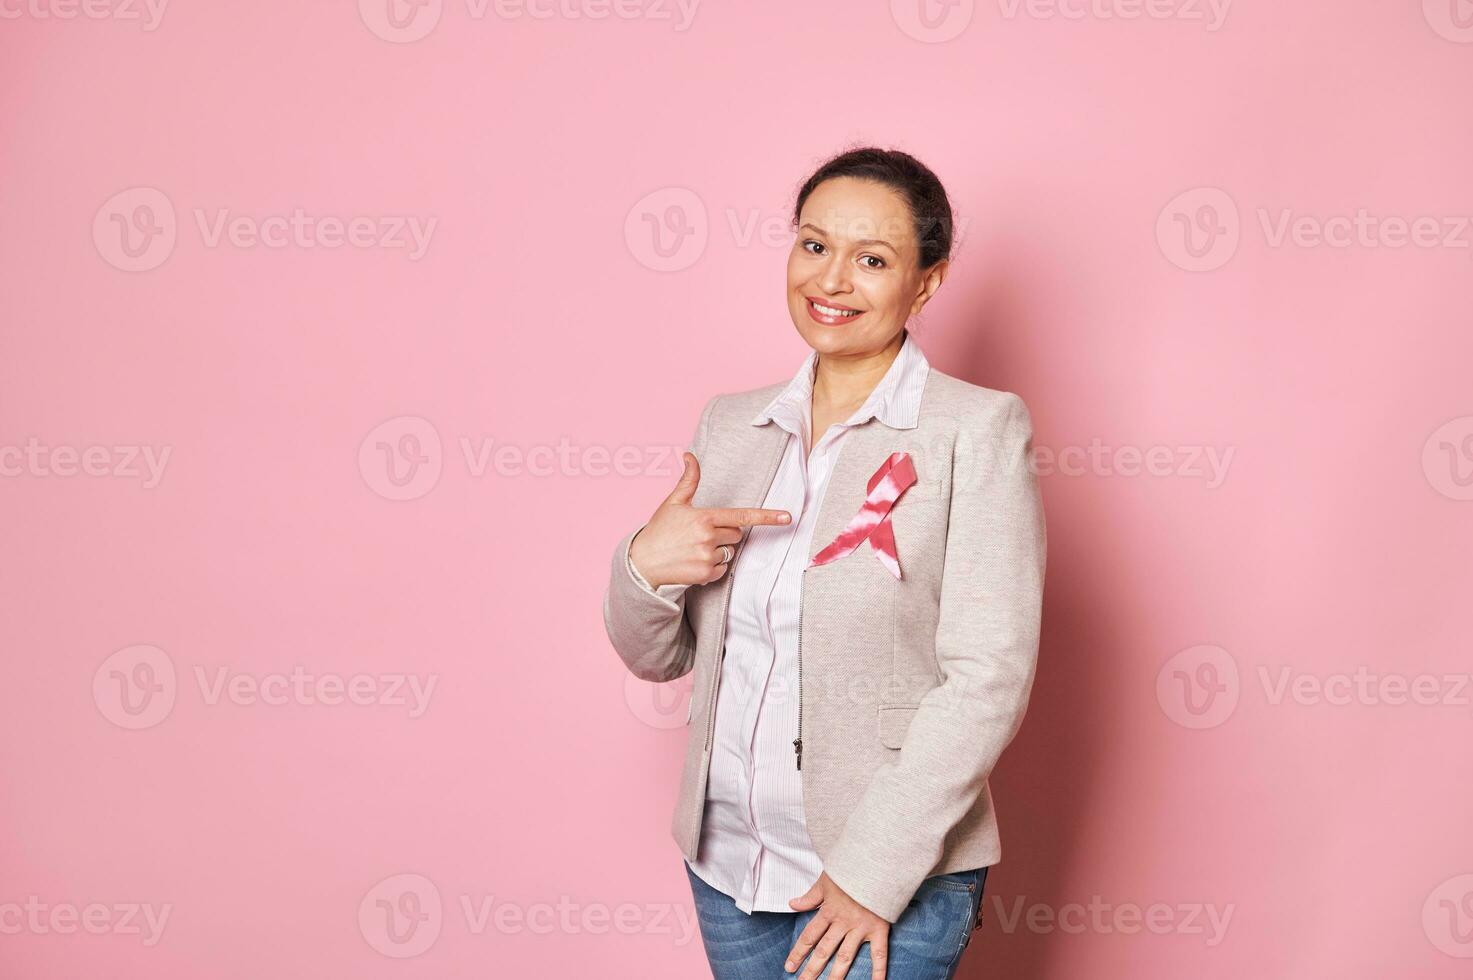 Positive multi-ethnic woman, standing over pink background and pointing her finger at a pink satin ribbon on her jacket photo